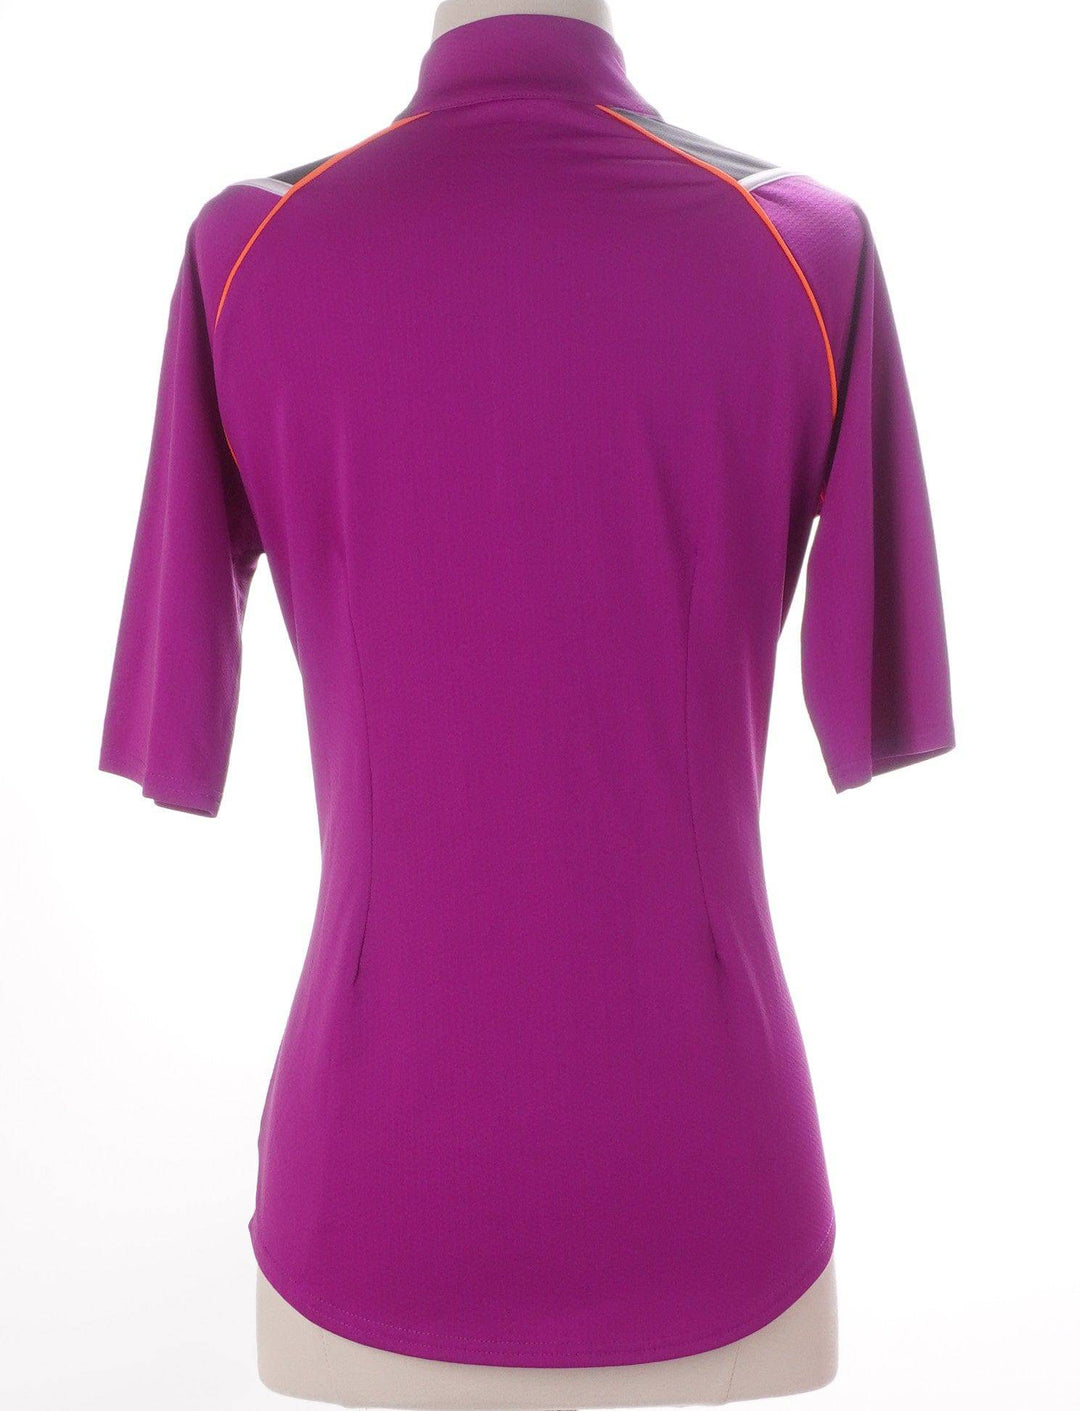 Skorzie Small / Purple Jofit Short Sleeve Top Exclusive Product - Dizzy 1/2 Sleeve - Size Small Apparel & Accessories